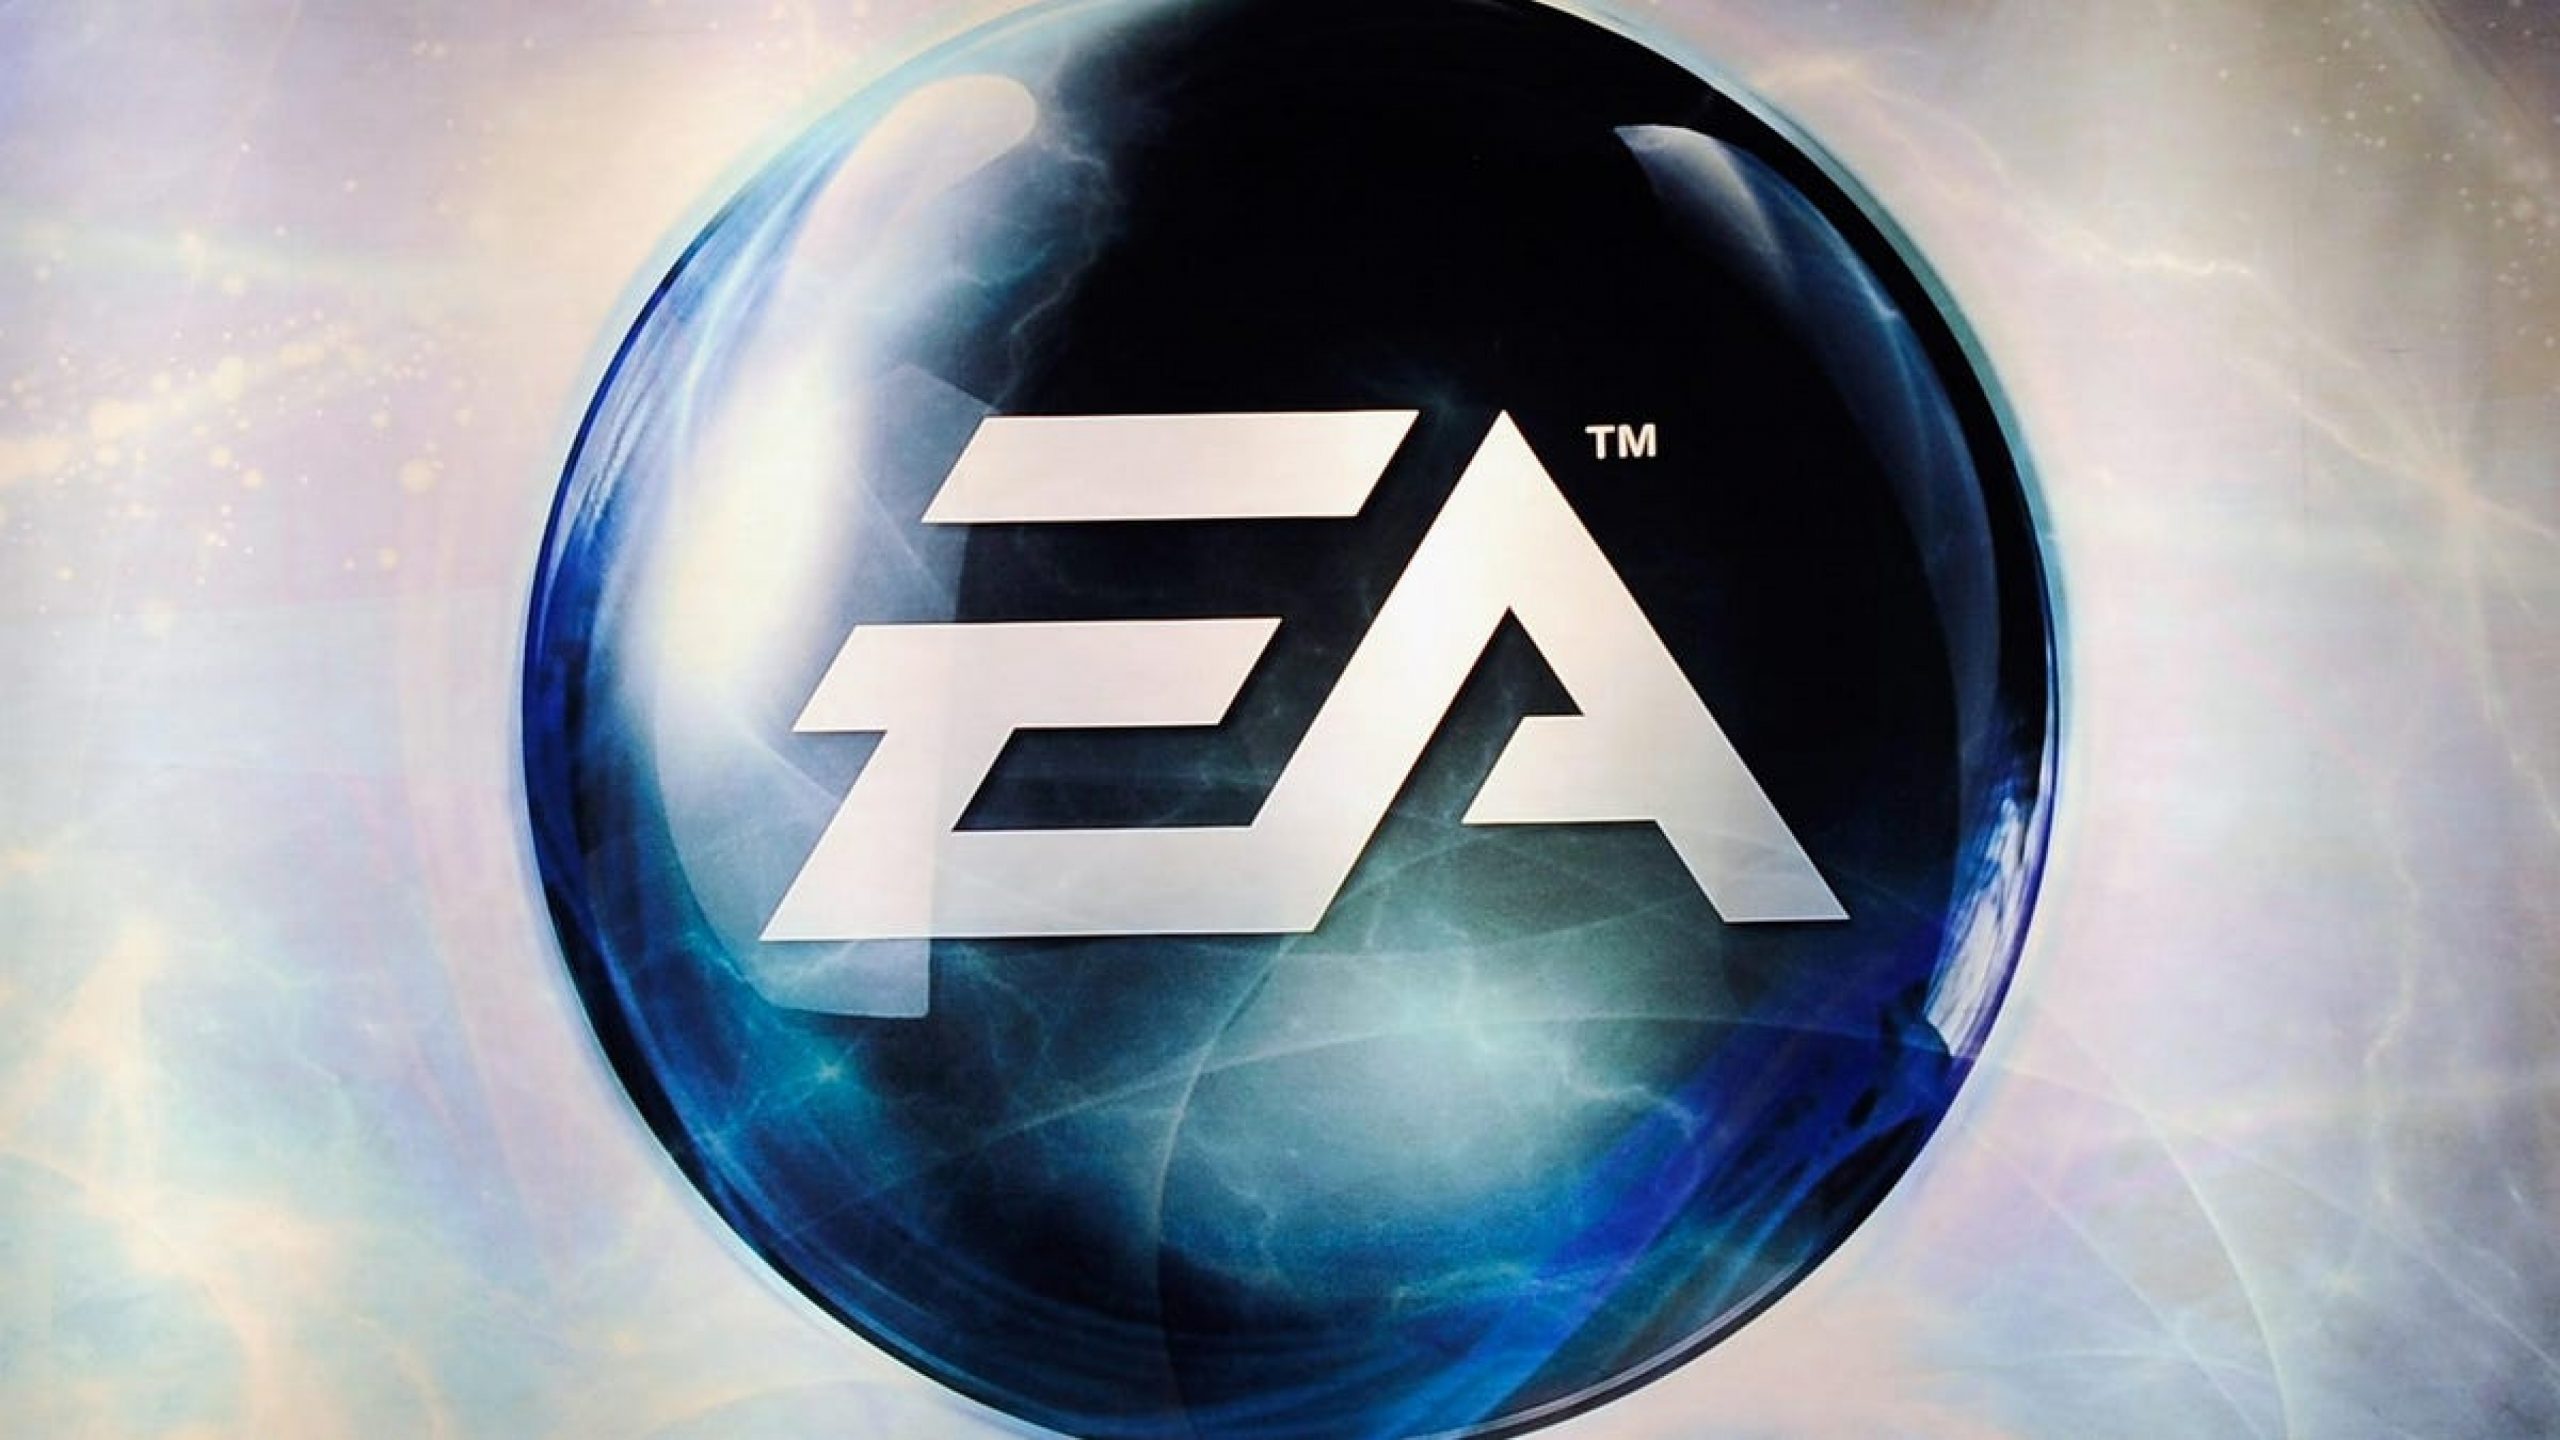 Hackers Stole Source Code from Electronic Arts and Are Selling It Online